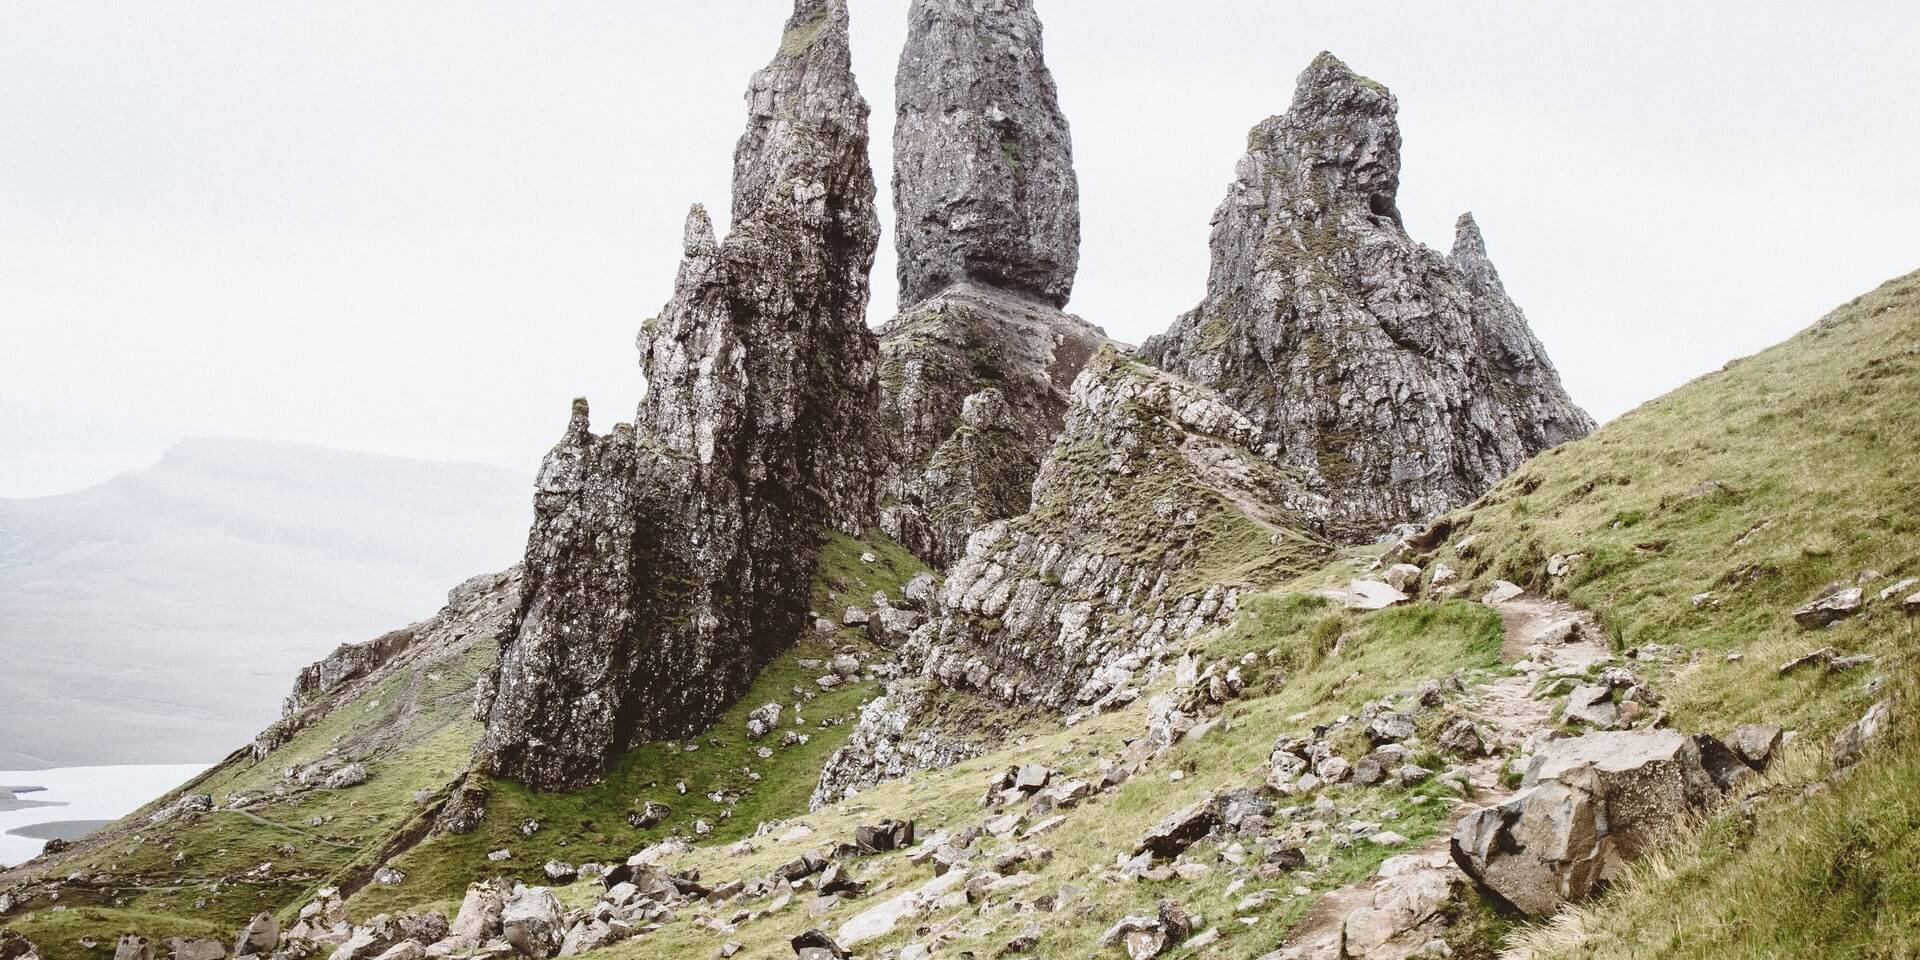 Hill rock formations